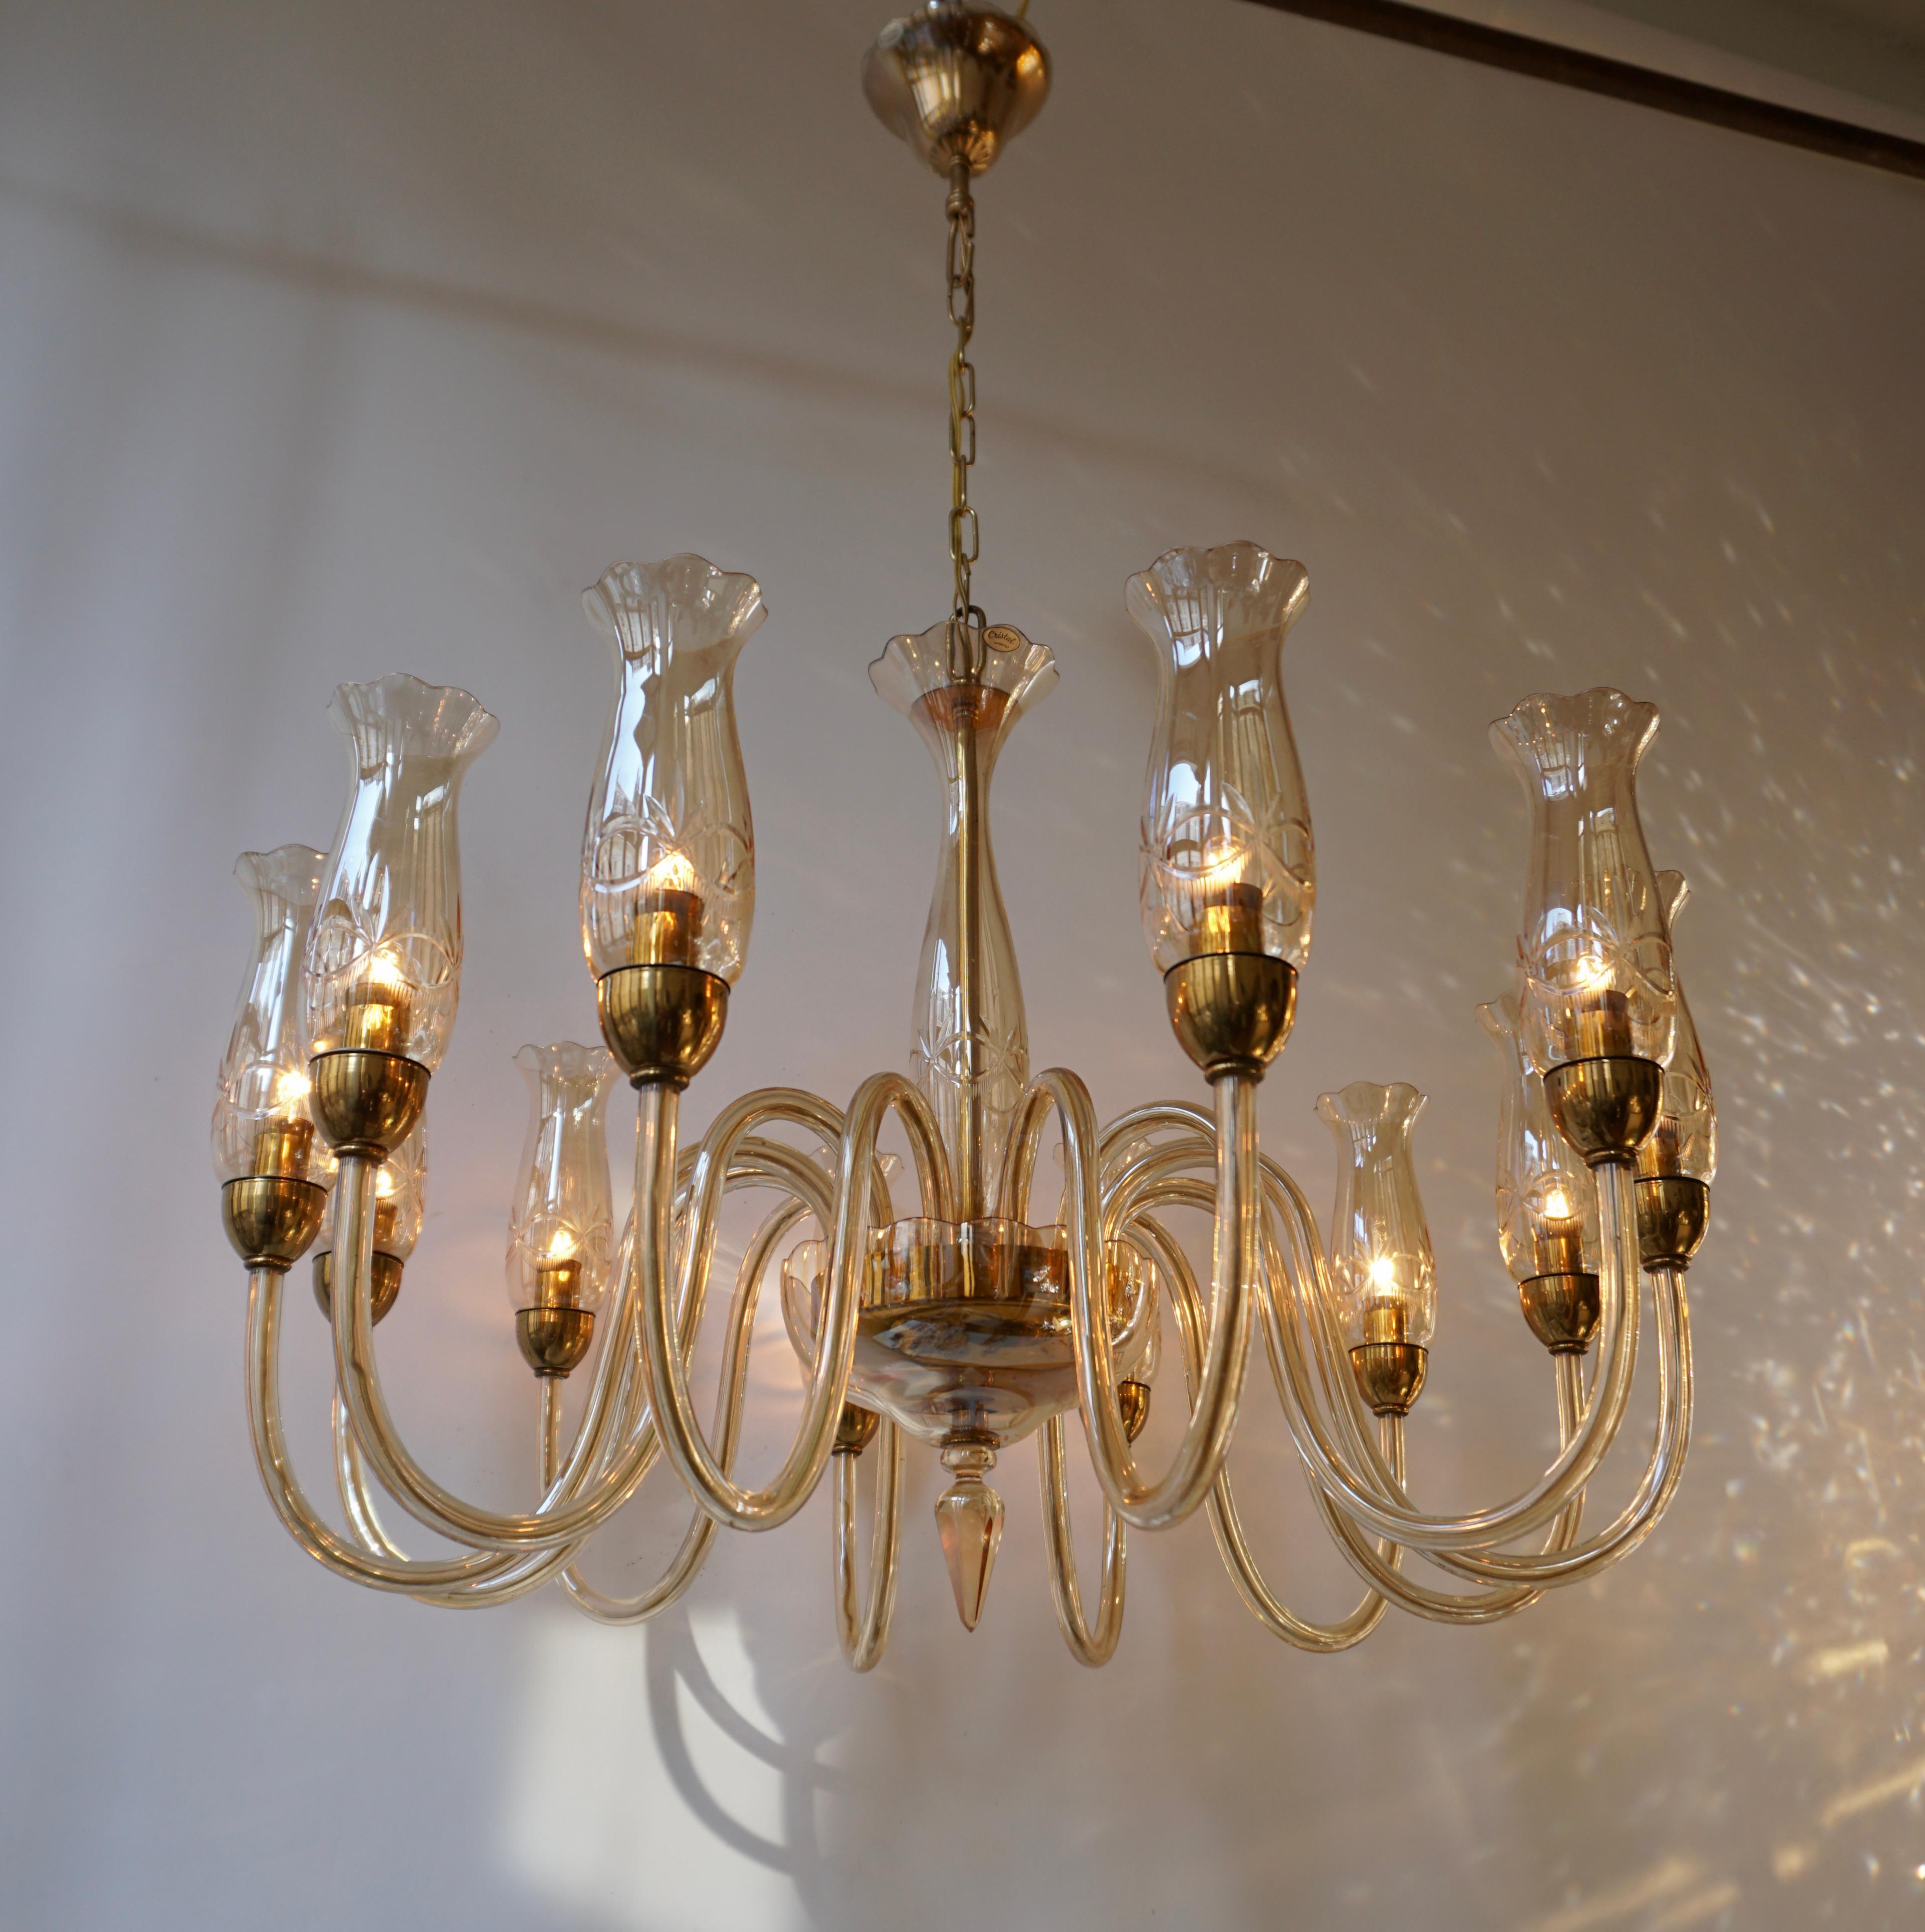 Contemporary Italian midcentury style, clear hand blown Venetian crystal glass chandeliers or pendant in the modern neoclassical style with twelve arms attributed to Barovier with brass trim. Beautiful and fully working chandelier with twelve-light